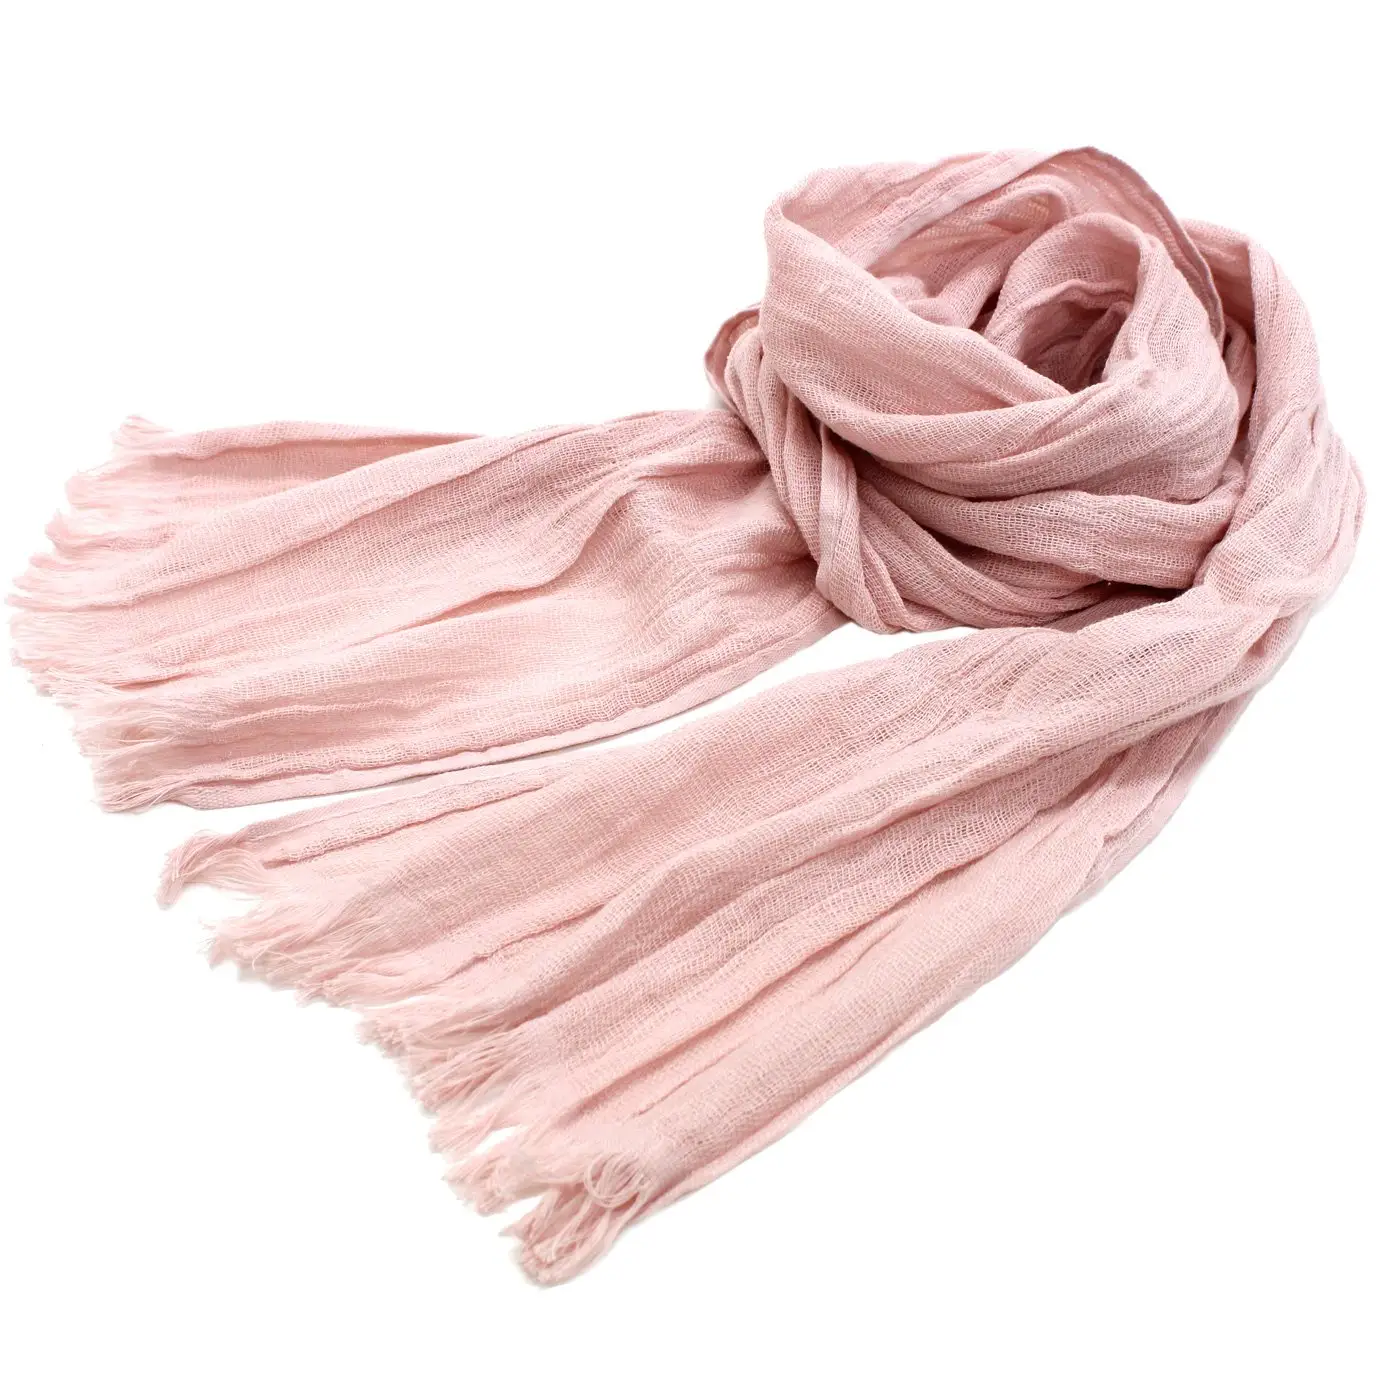 UV cut Cotton gauze scarf made in Japan Gauze shawls 100% cotton 22 * 178 cm UV protection Shell pink